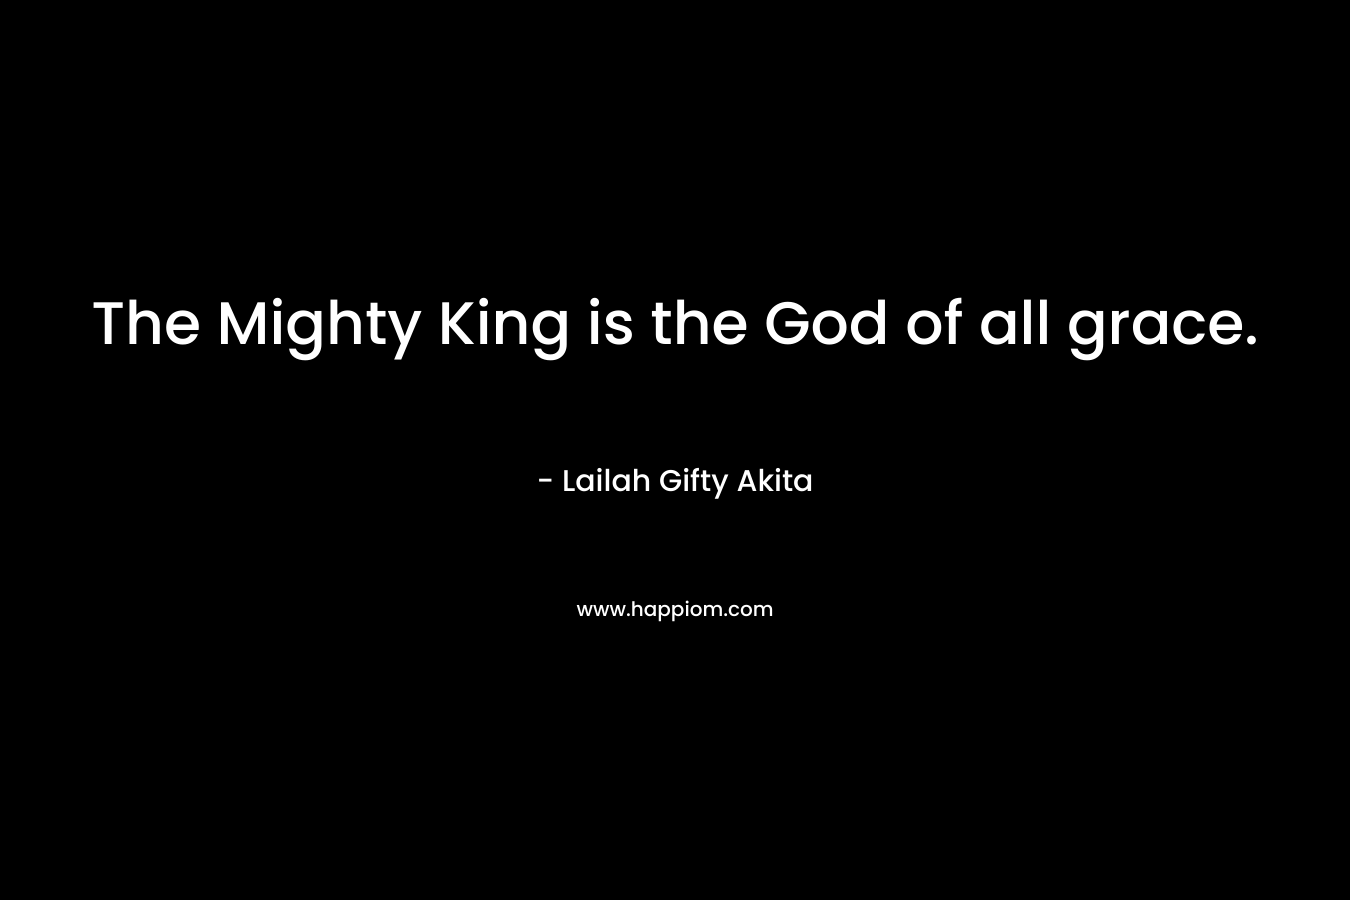 The Mighty King is the God of all grace.